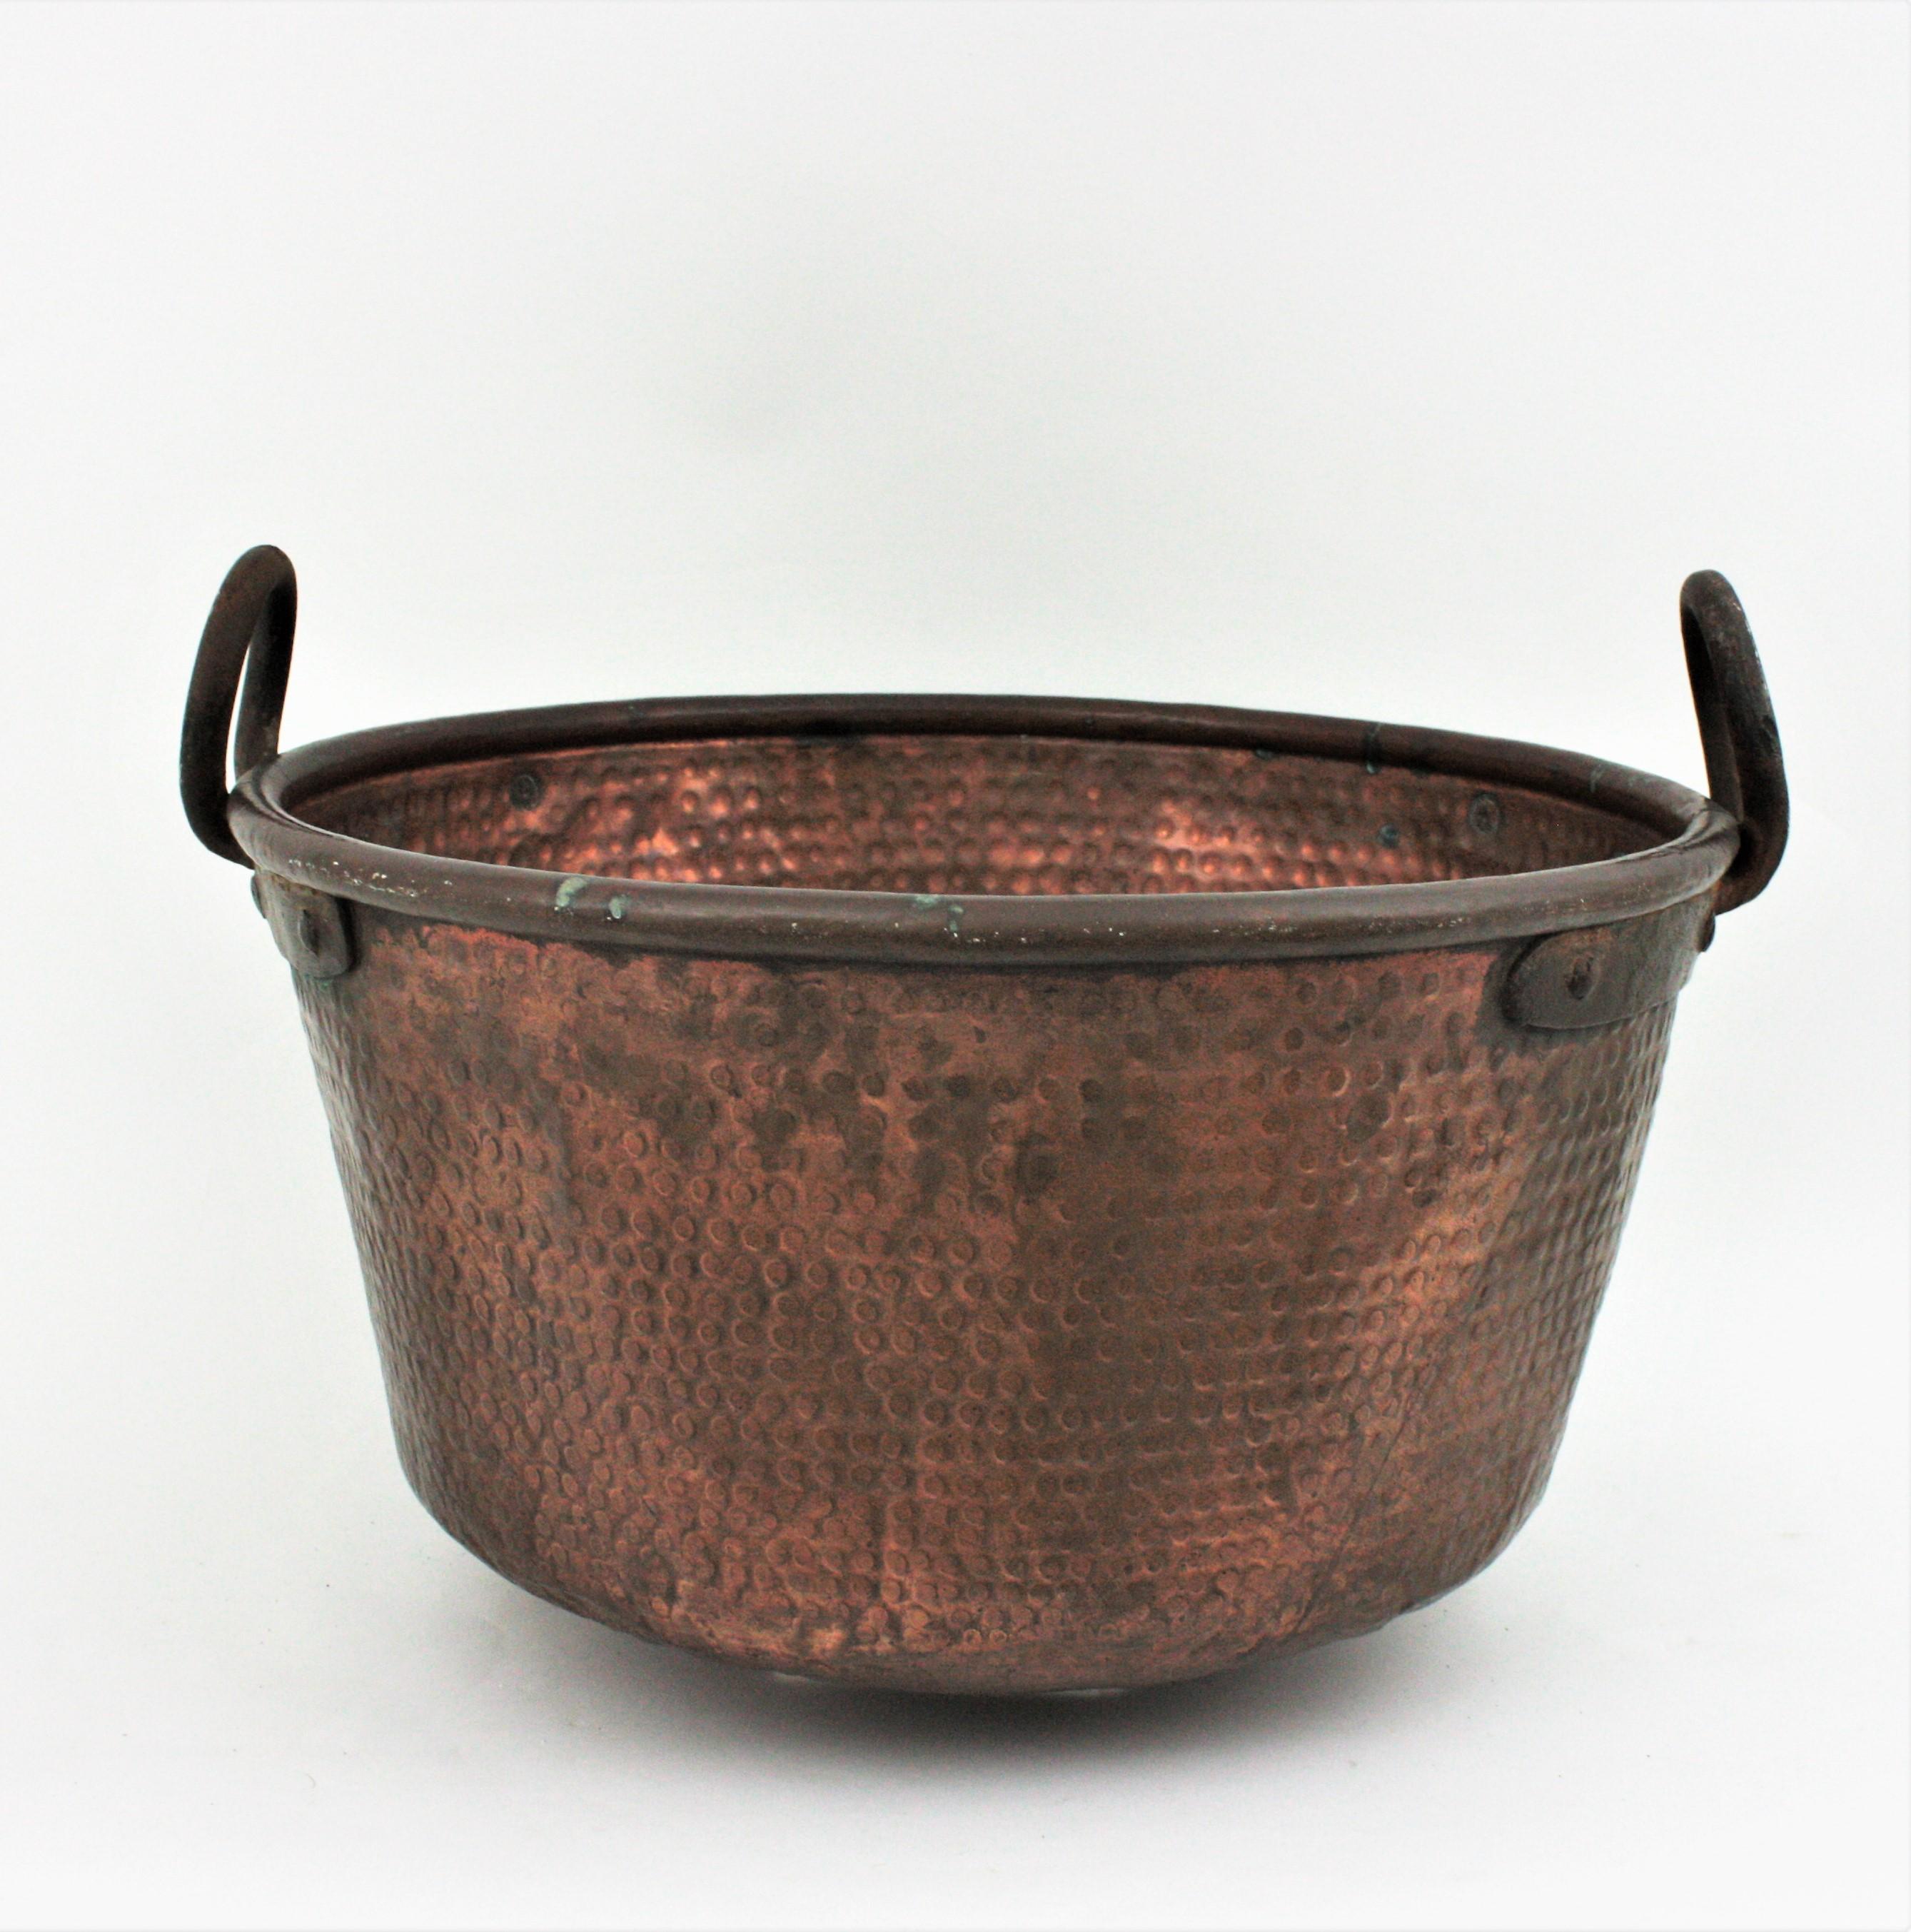 Oversized hand-hammered copper cauldron with iron handles, Spain, 1920s.
This handcrafted copper cauldron has a dramatic aged patina. The copper is heavily marked by the pass of time and it has a strong visual effect.
The iron handles are attached